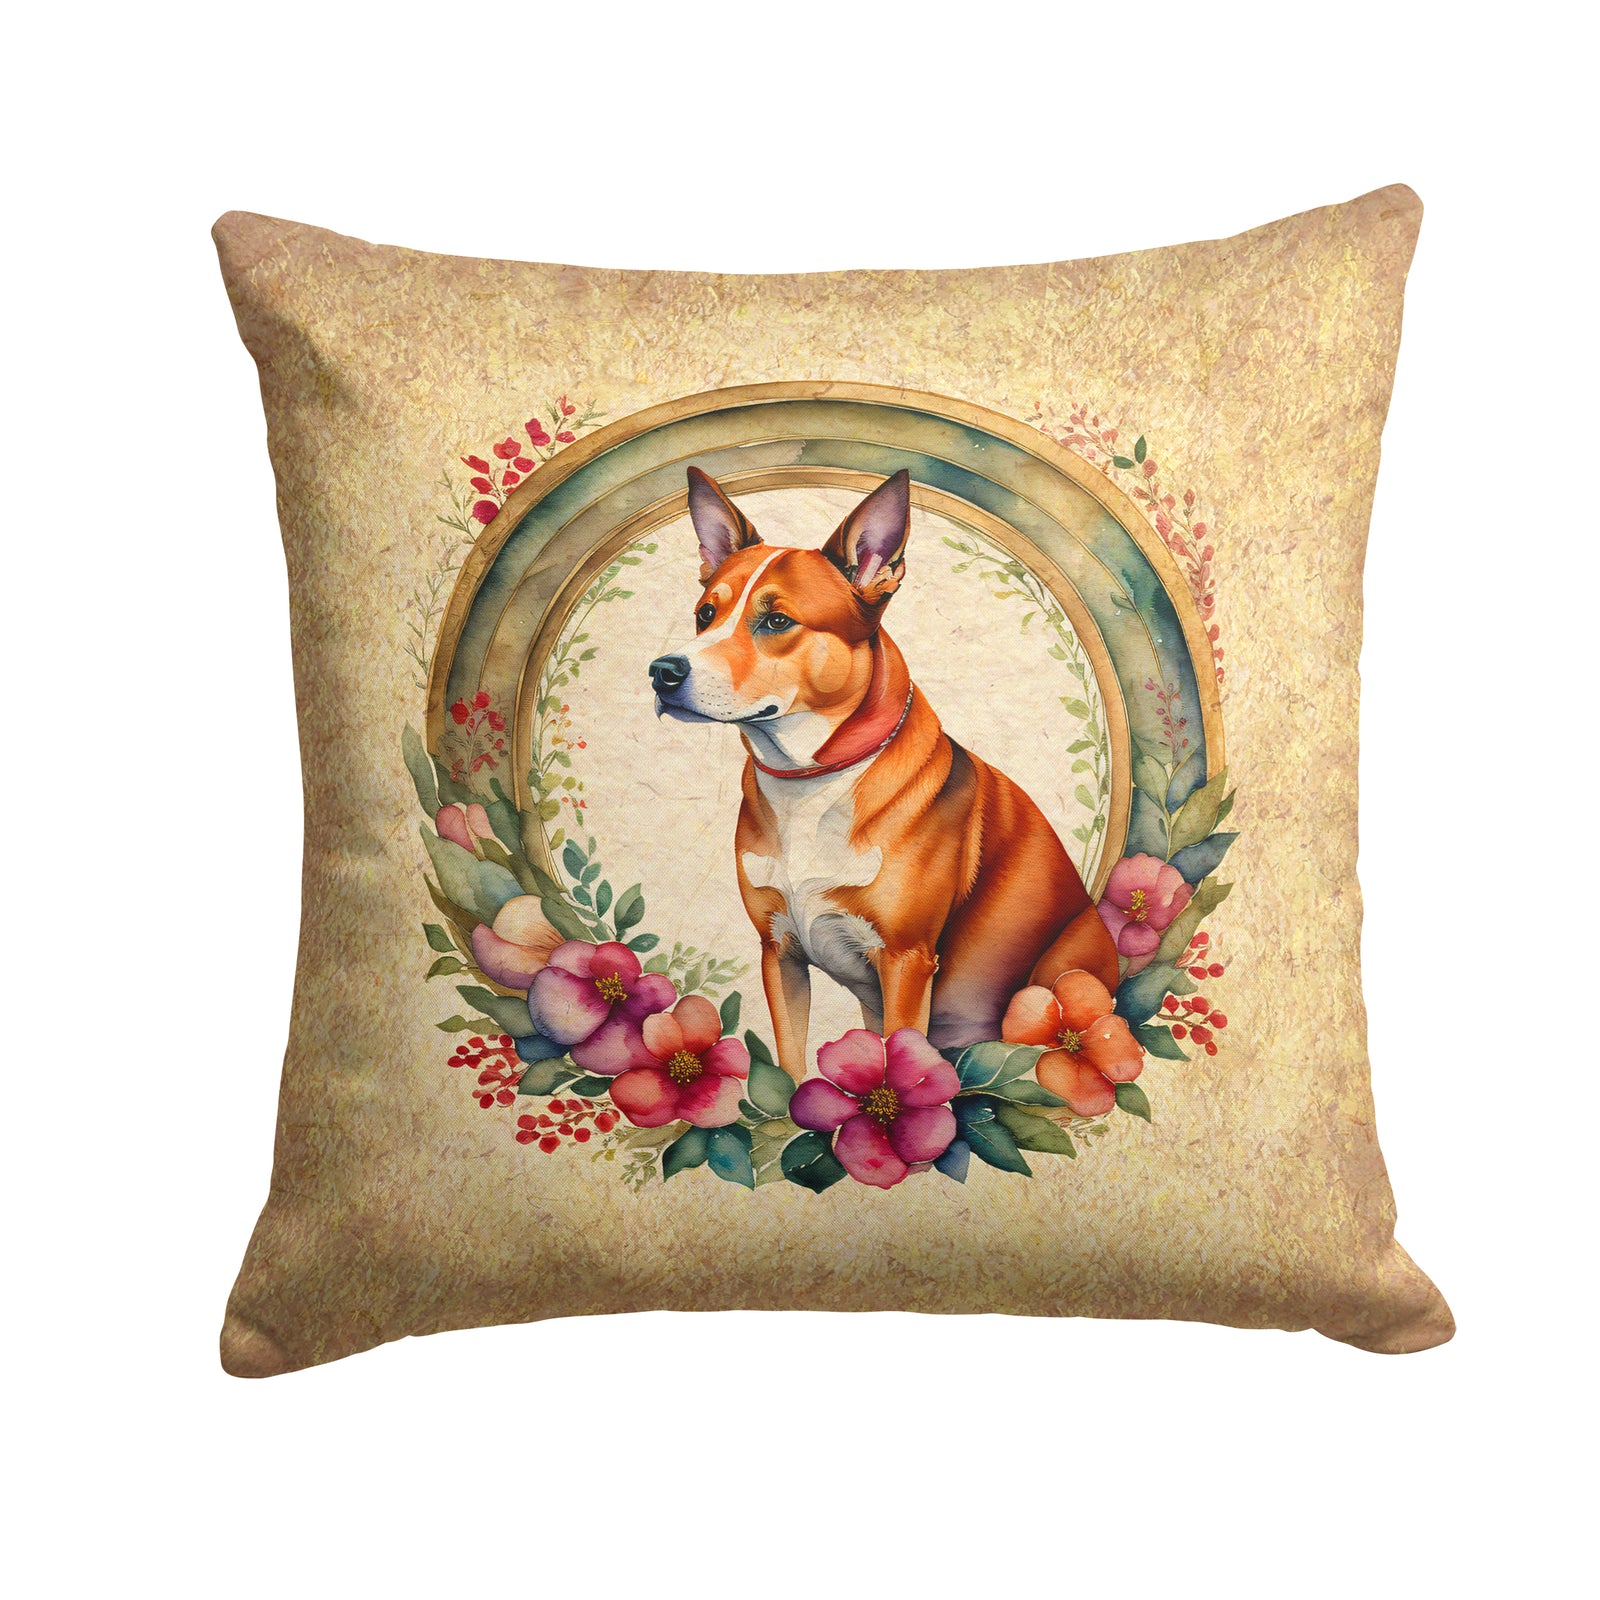 Buy this Basenji and Flowers Fabric Decorative Pillow